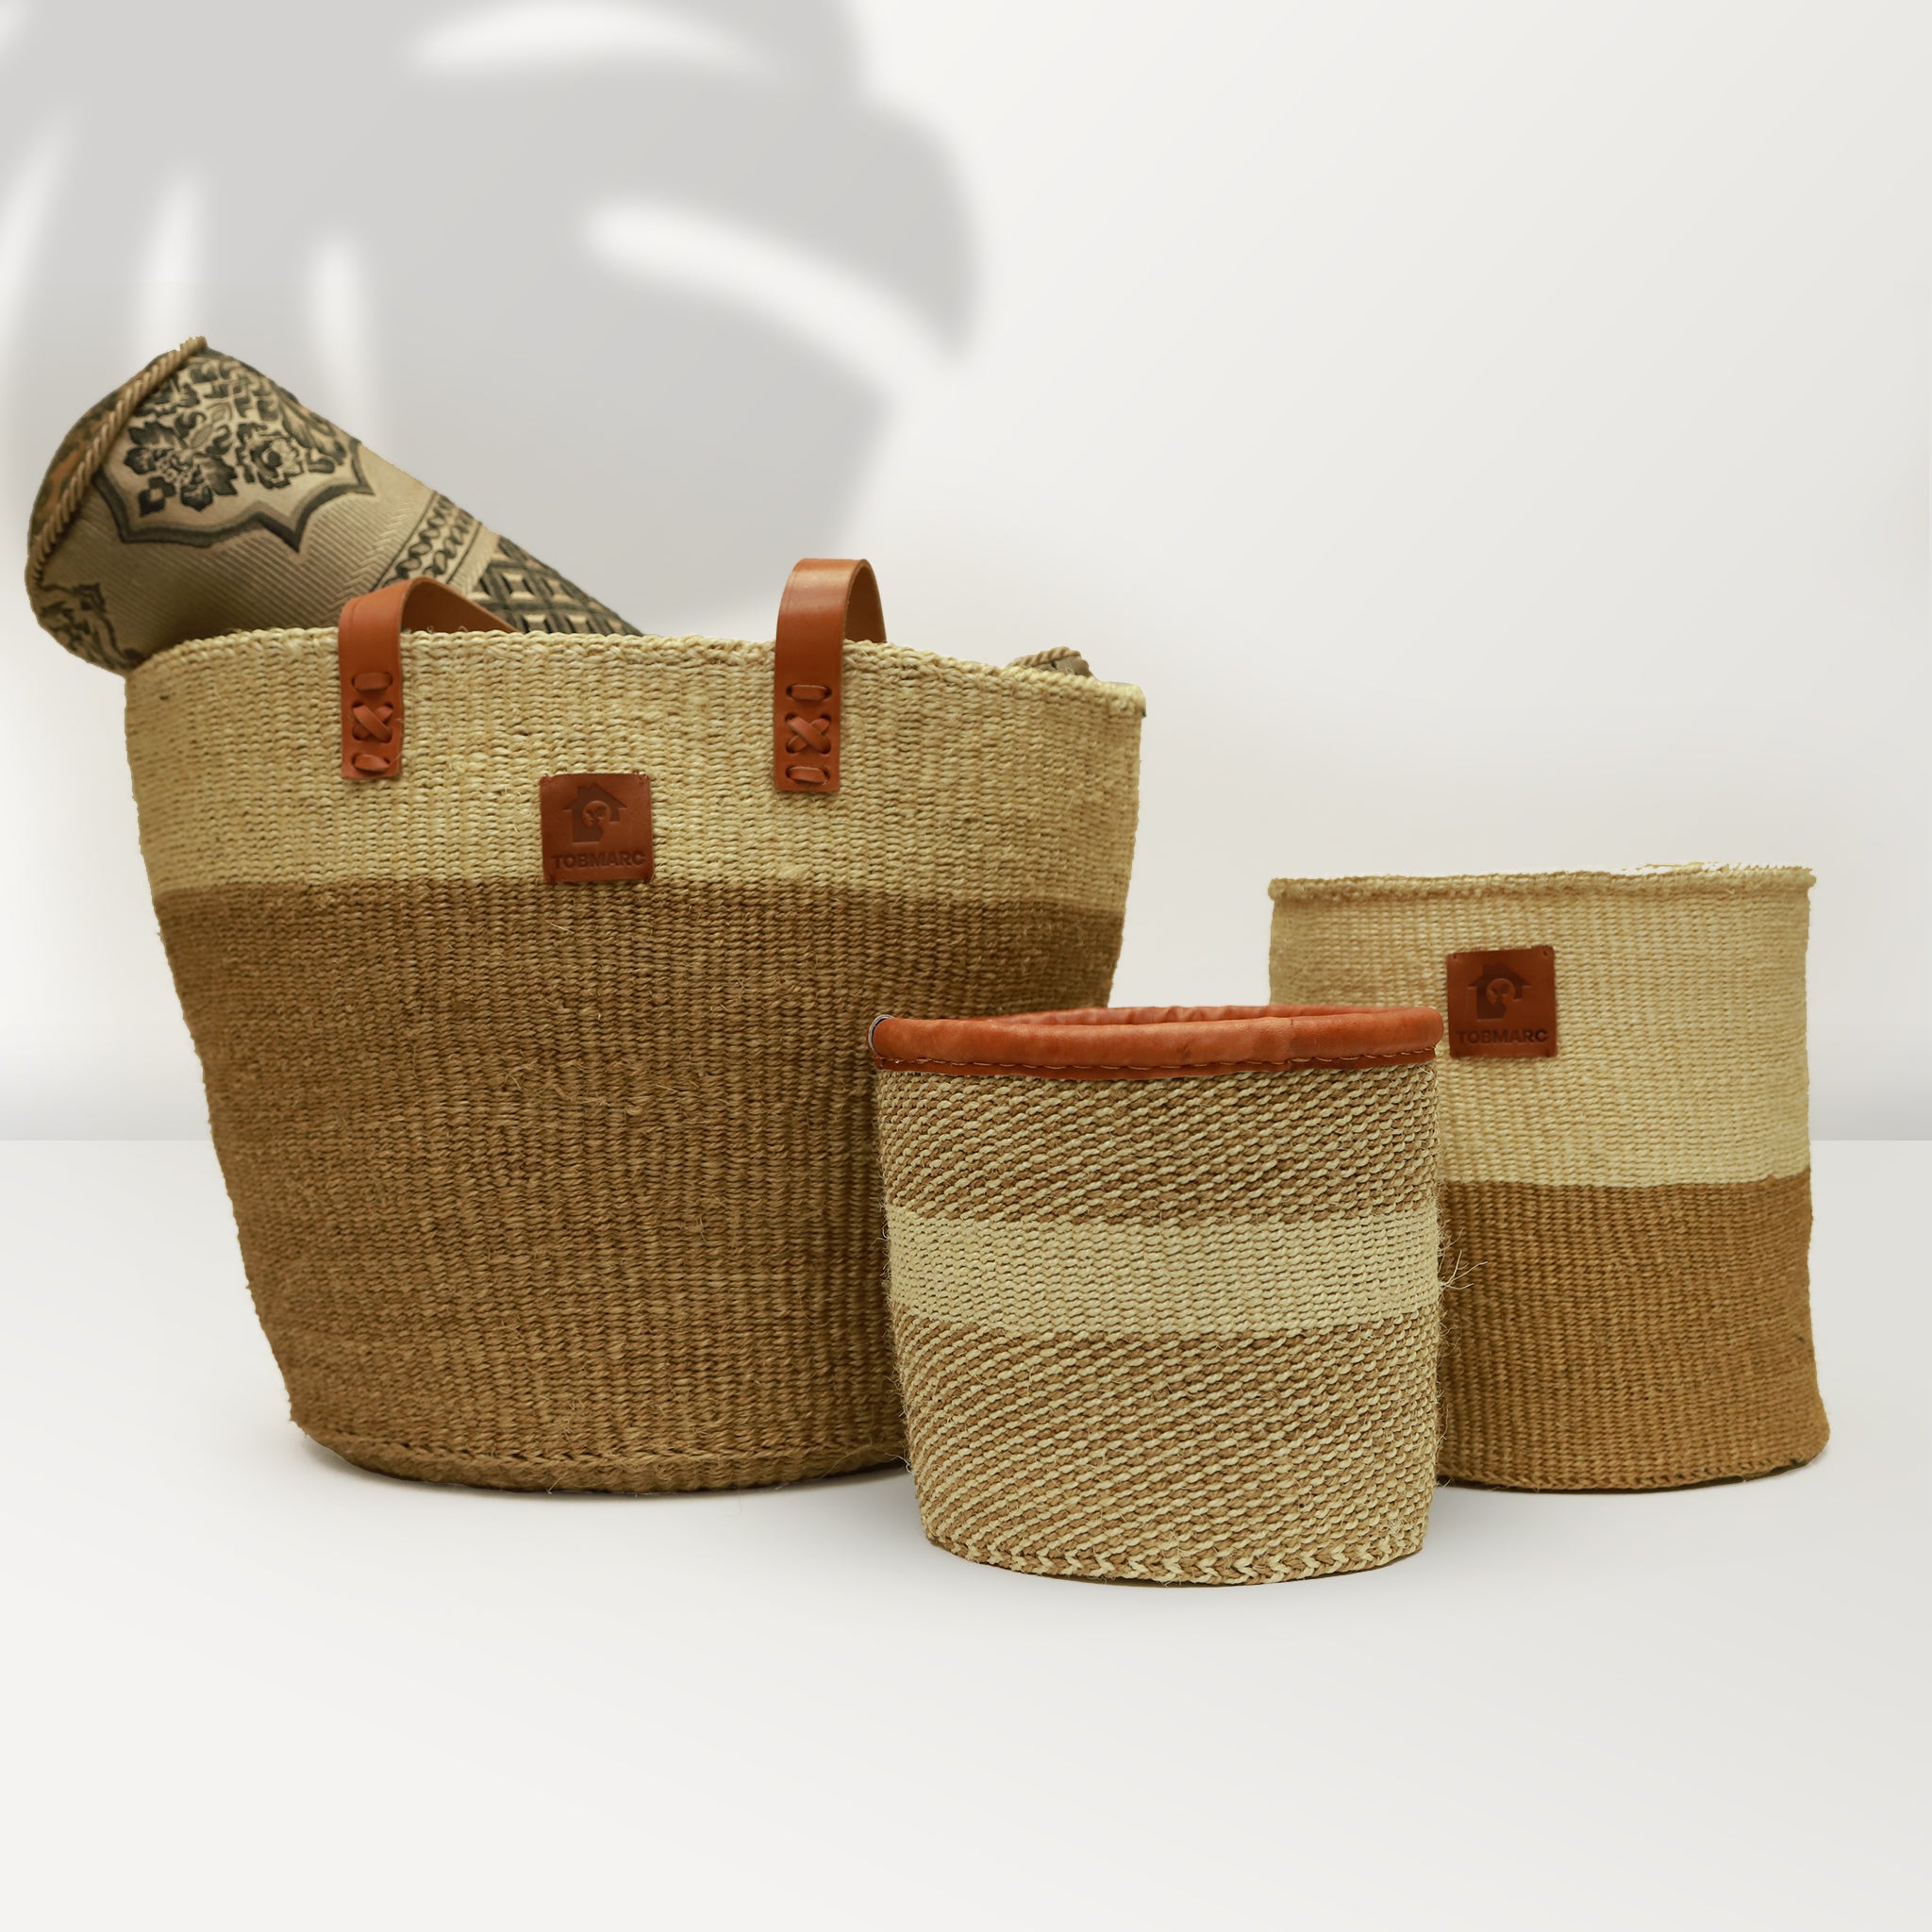 WHIBEISET3 - WOVEN LAUNDRY BASKET, Woven Sisal Basket, Utility Planter Basket With Handle, African Natural Sisal Woven Blanket Basket - Tobmarc Home Decor & Gifts 